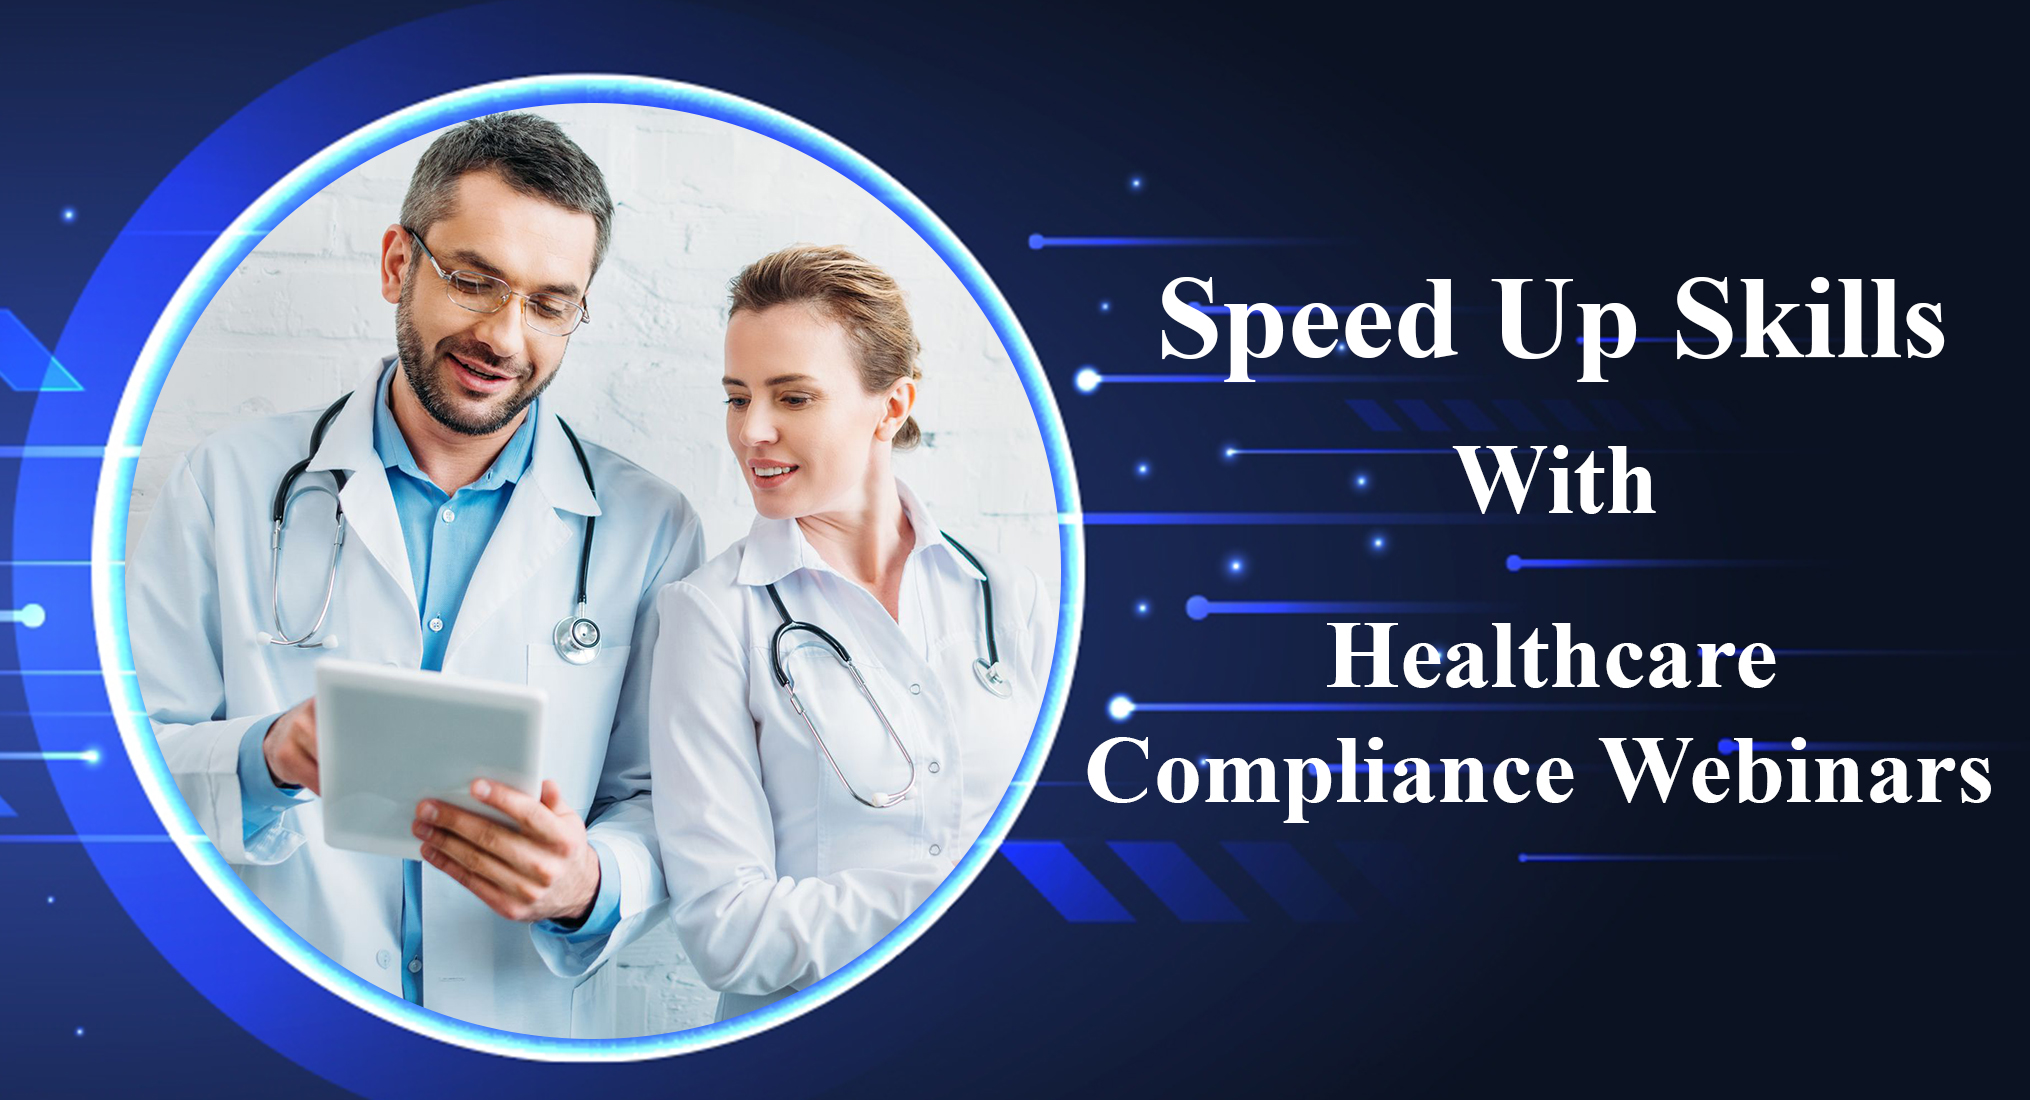 Speed Up Skills With Healthcare Compliance Webinars